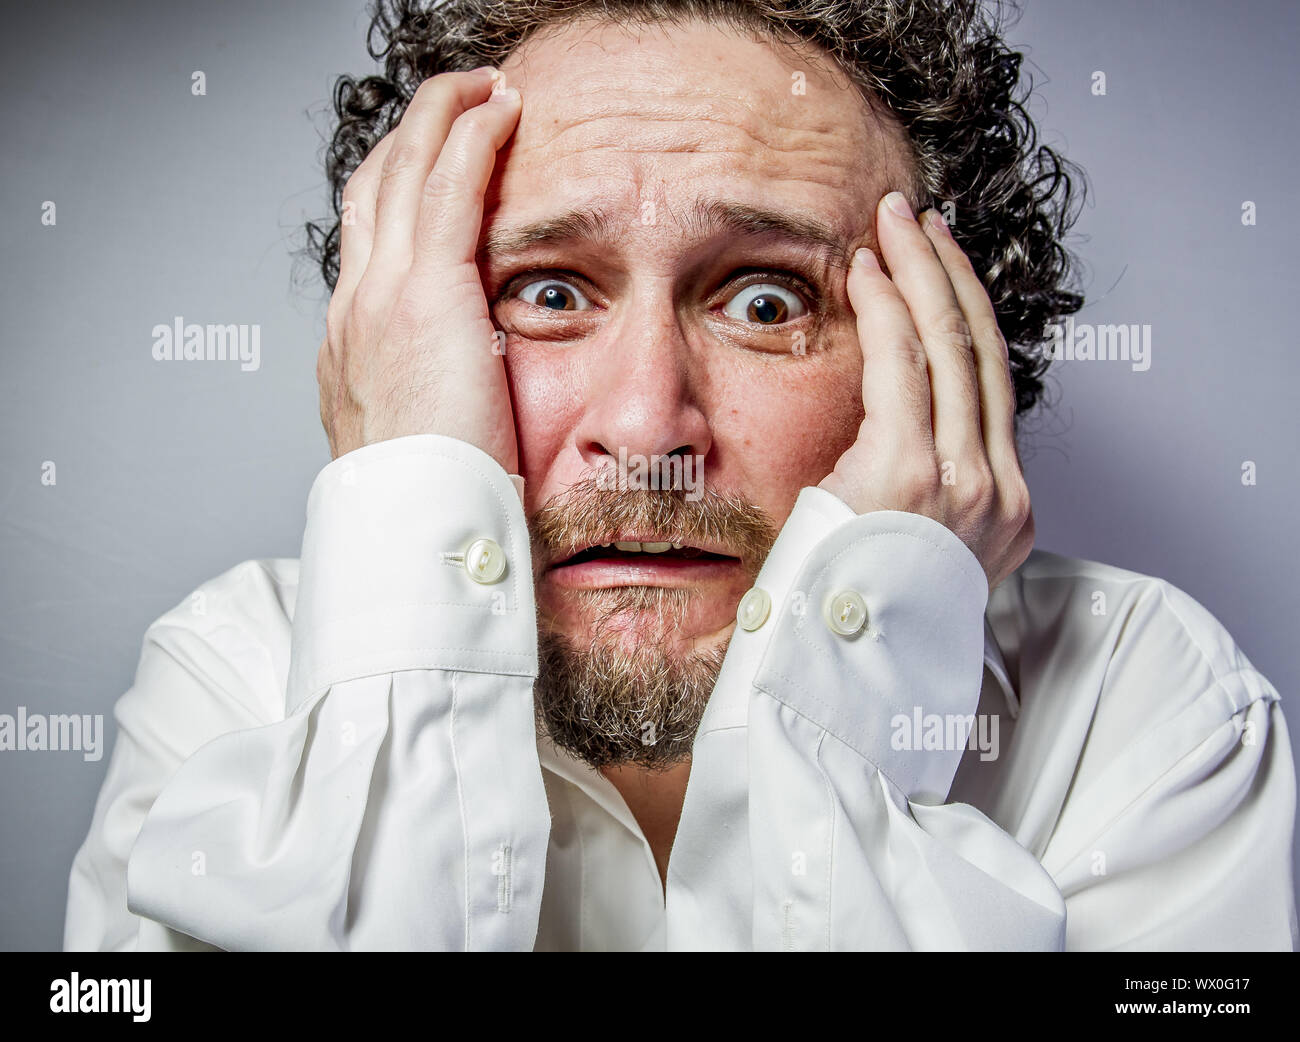 concern for the future, man with intense expression, white shirt Stock Photo